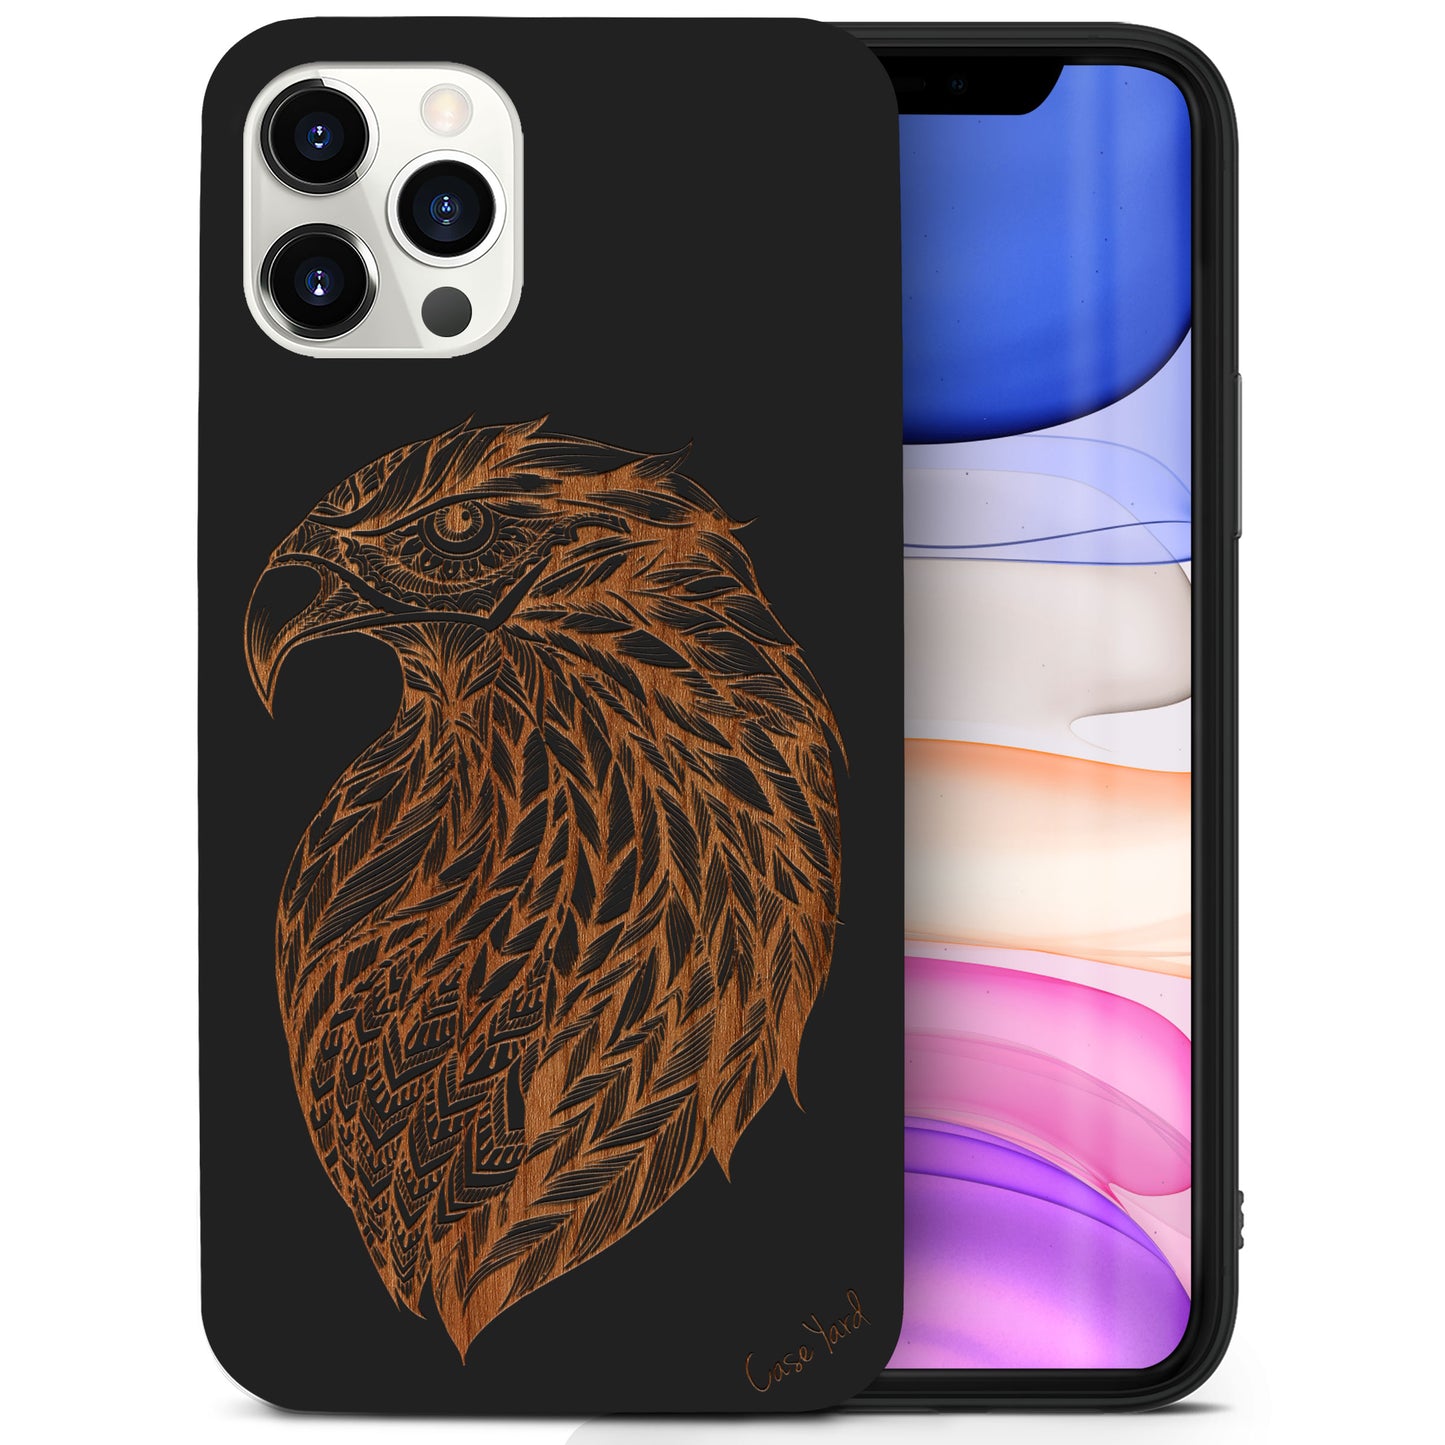 Wooden Cell Phone Case Cover, Laser Engraved case for iPhone & Samsung phone Eagle Sketch Design